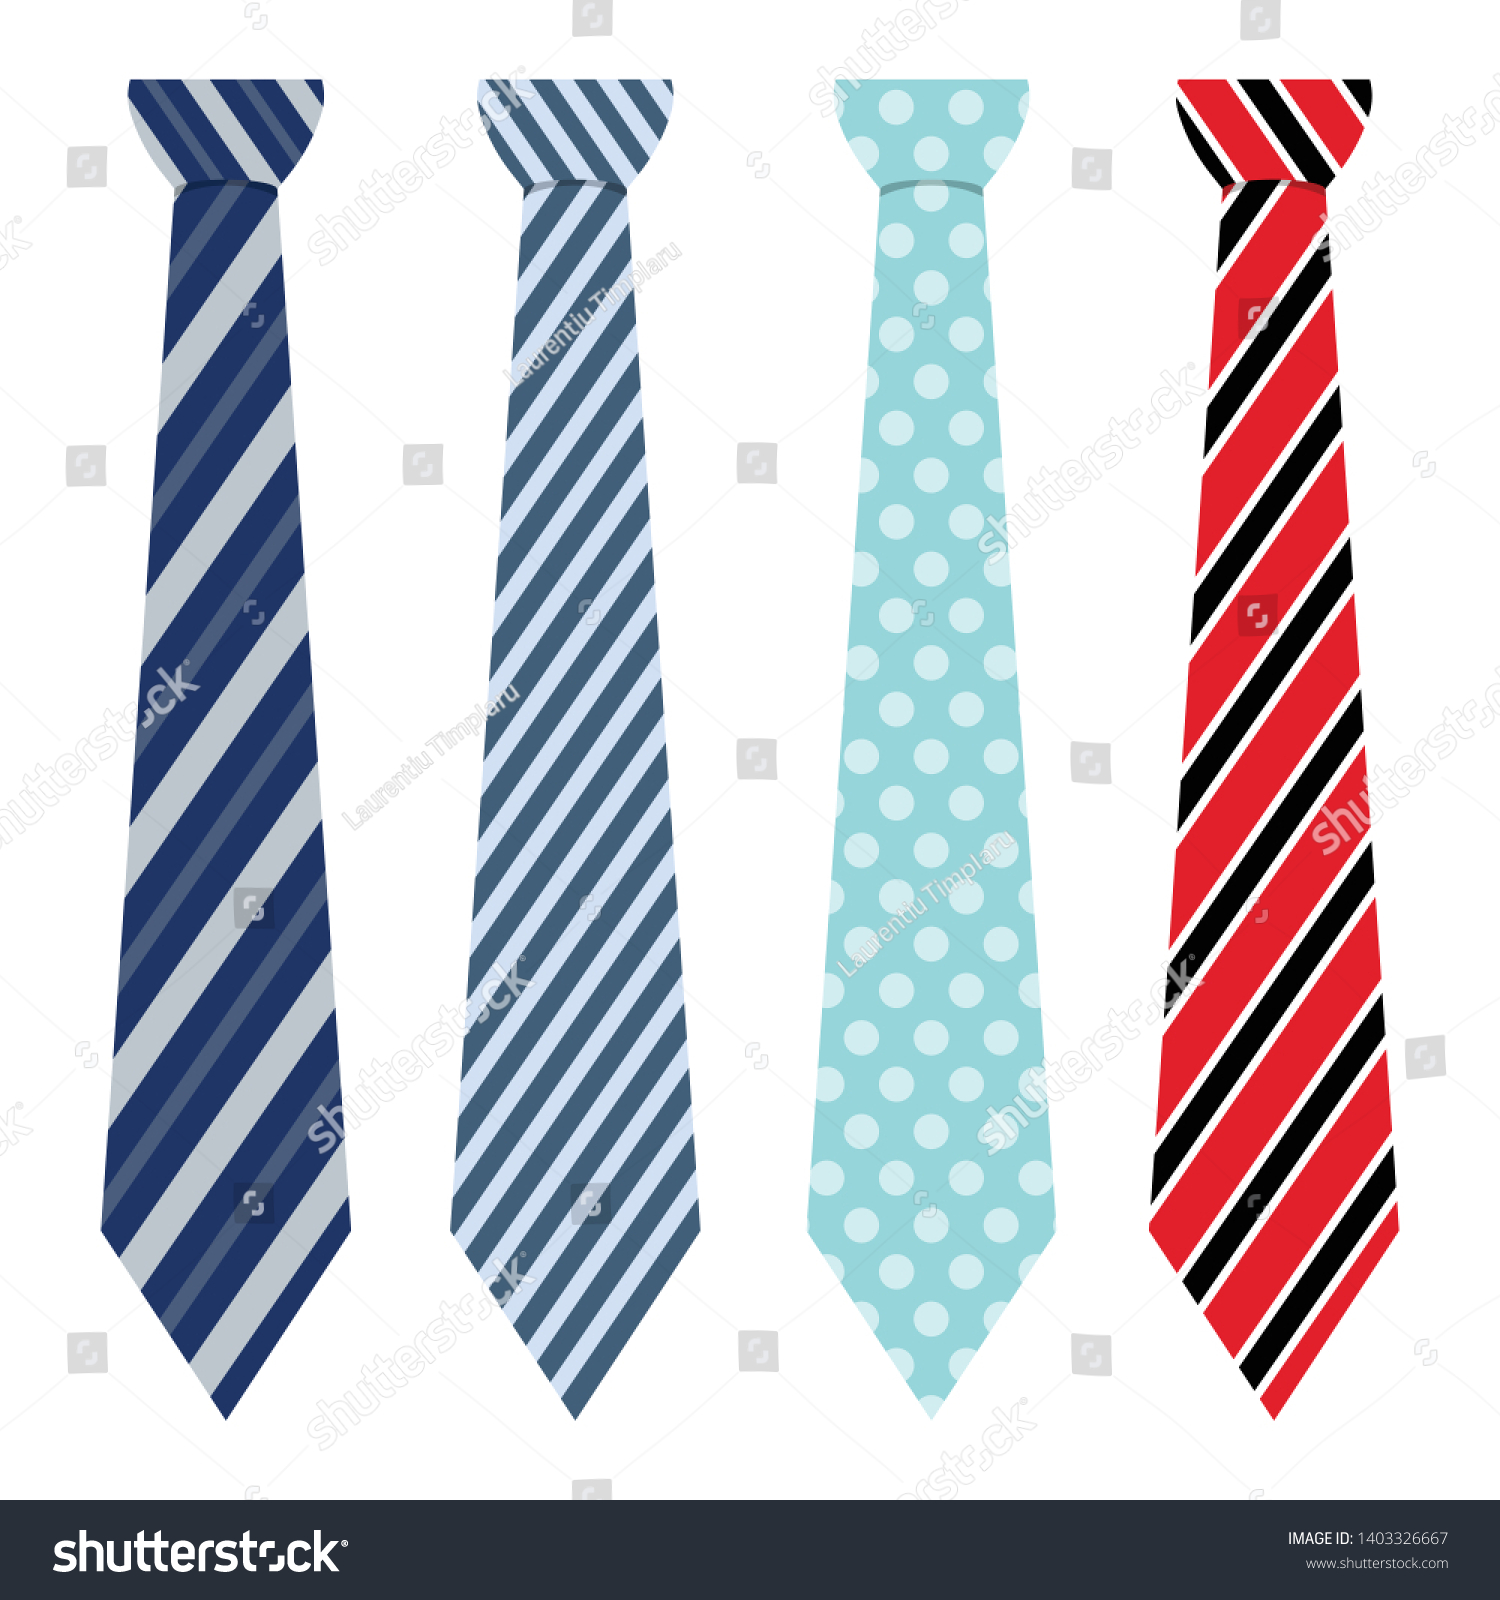 Neck Tie Vector Design Illustration Isolated Stock Vector (Royalty Free ...